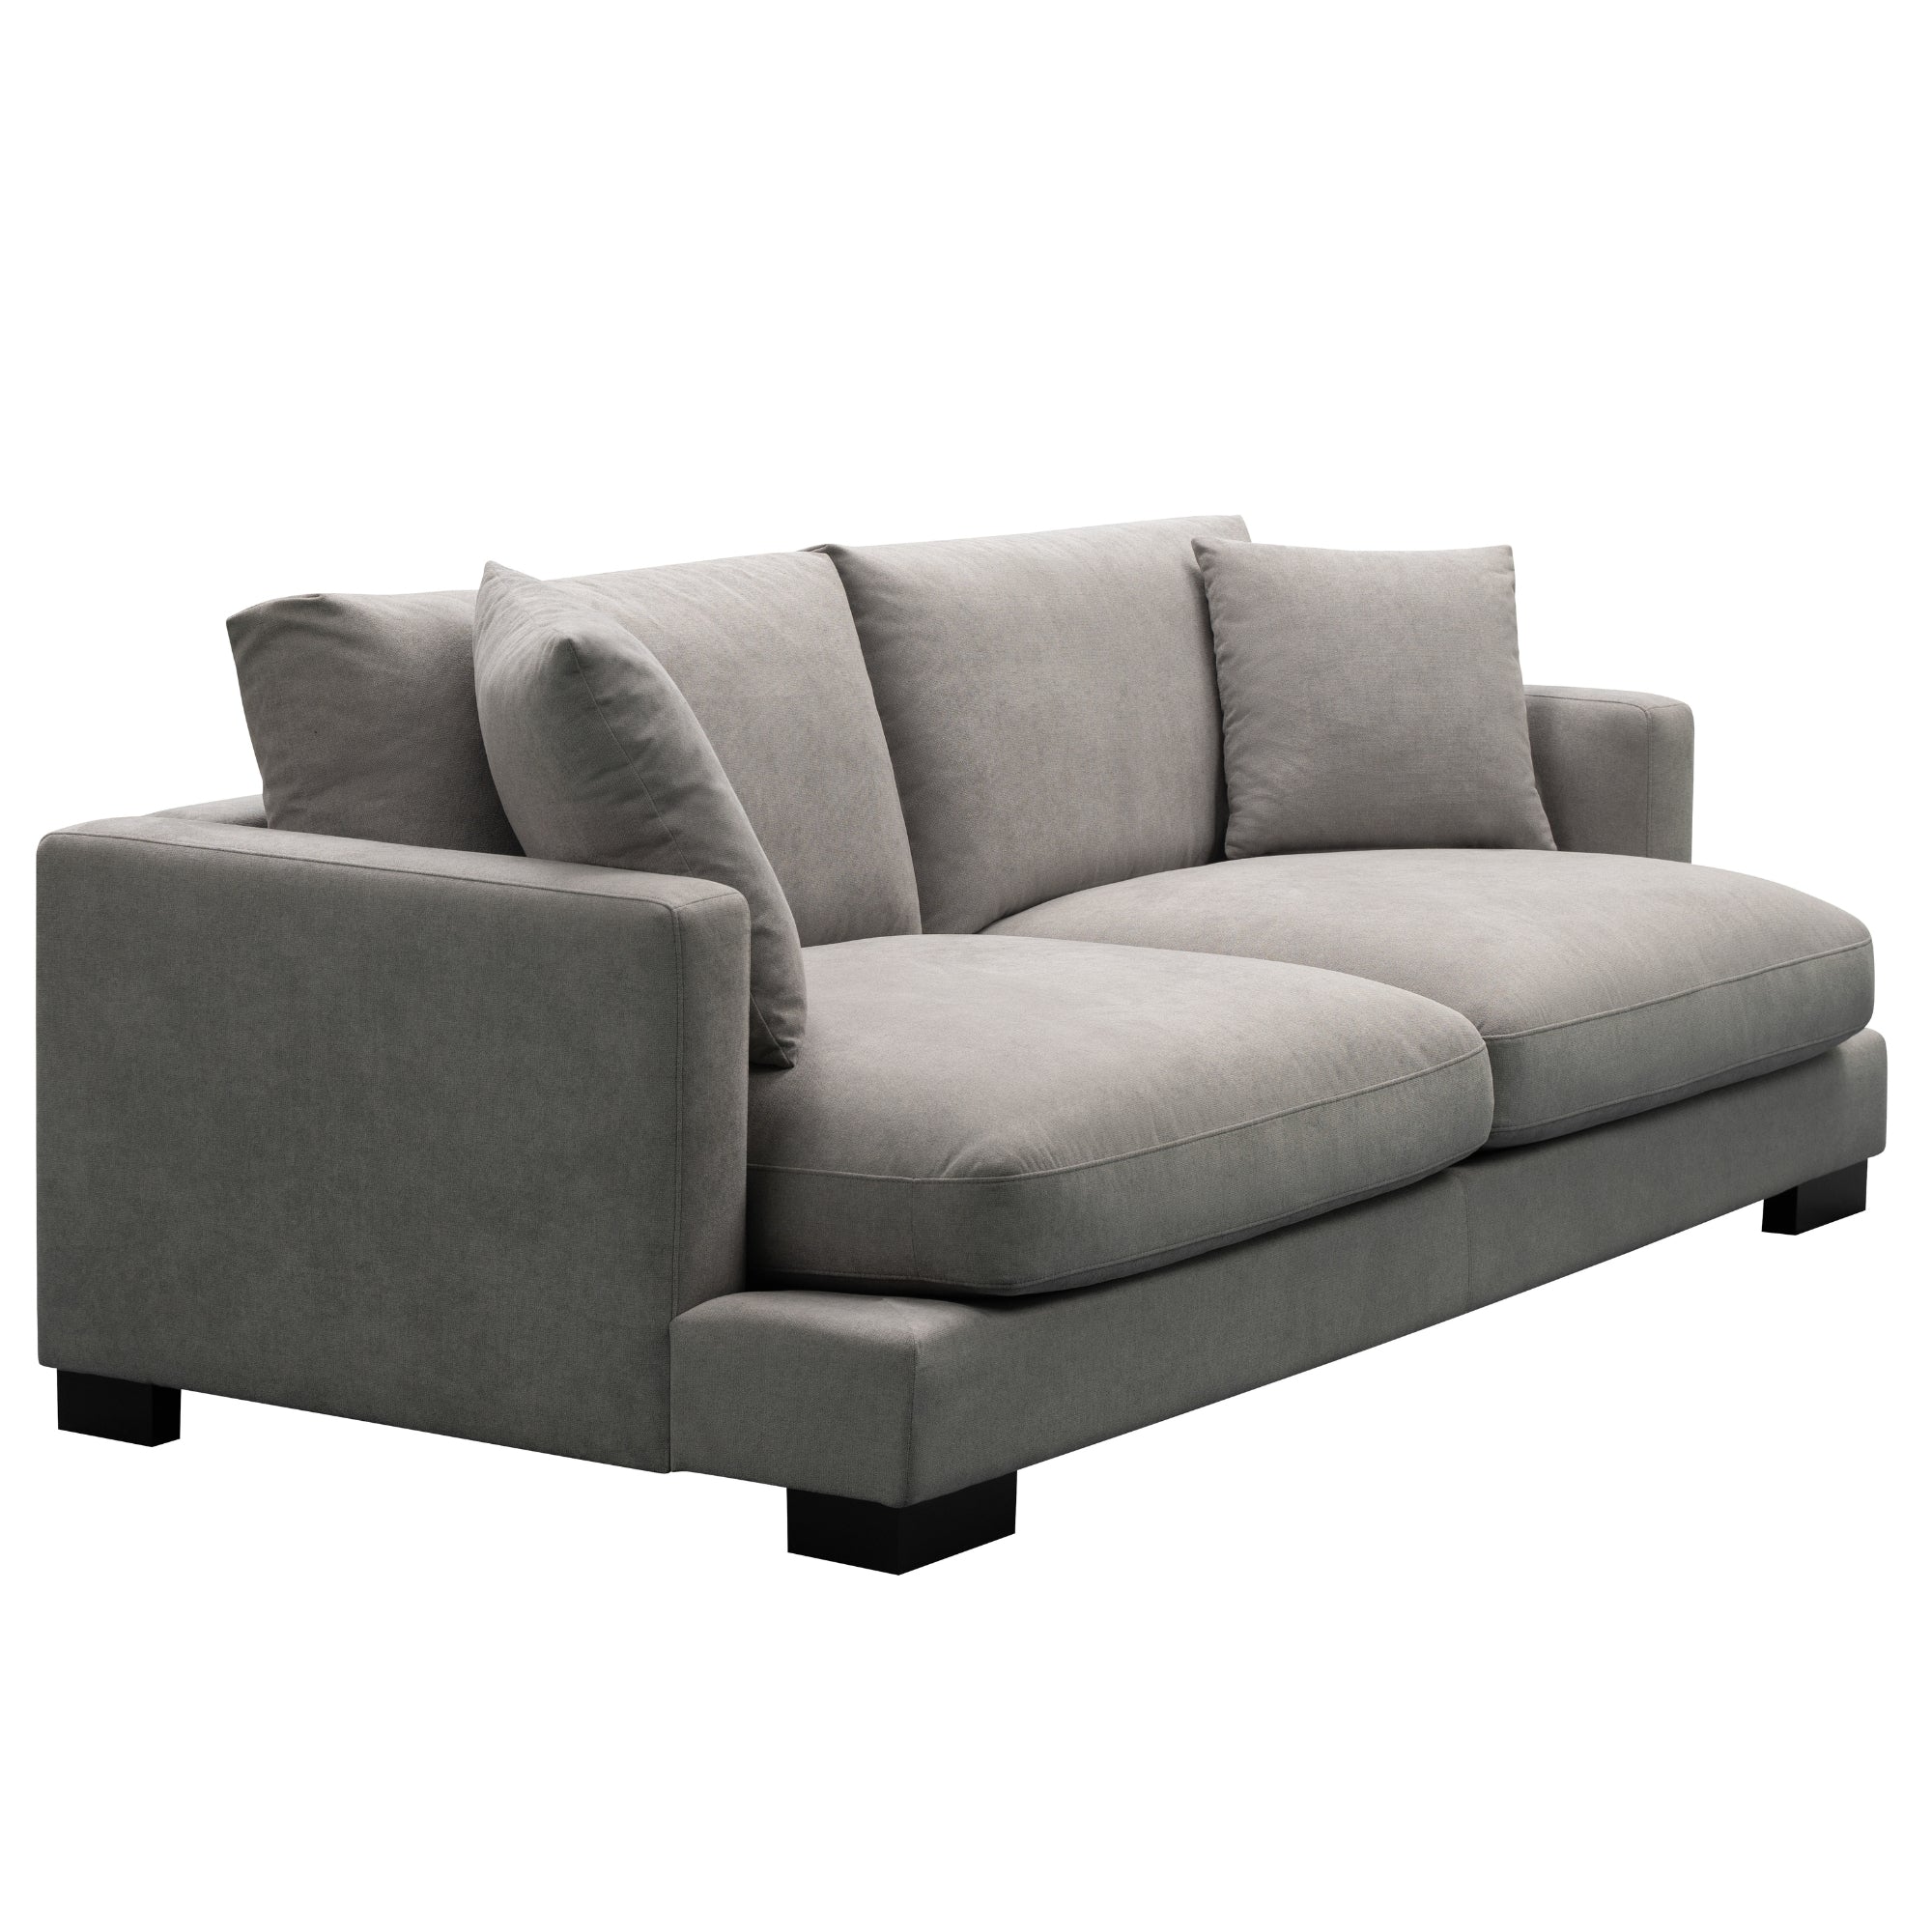 Light Grey 3-Seater Sofa with Deep Seating & Wood Legs